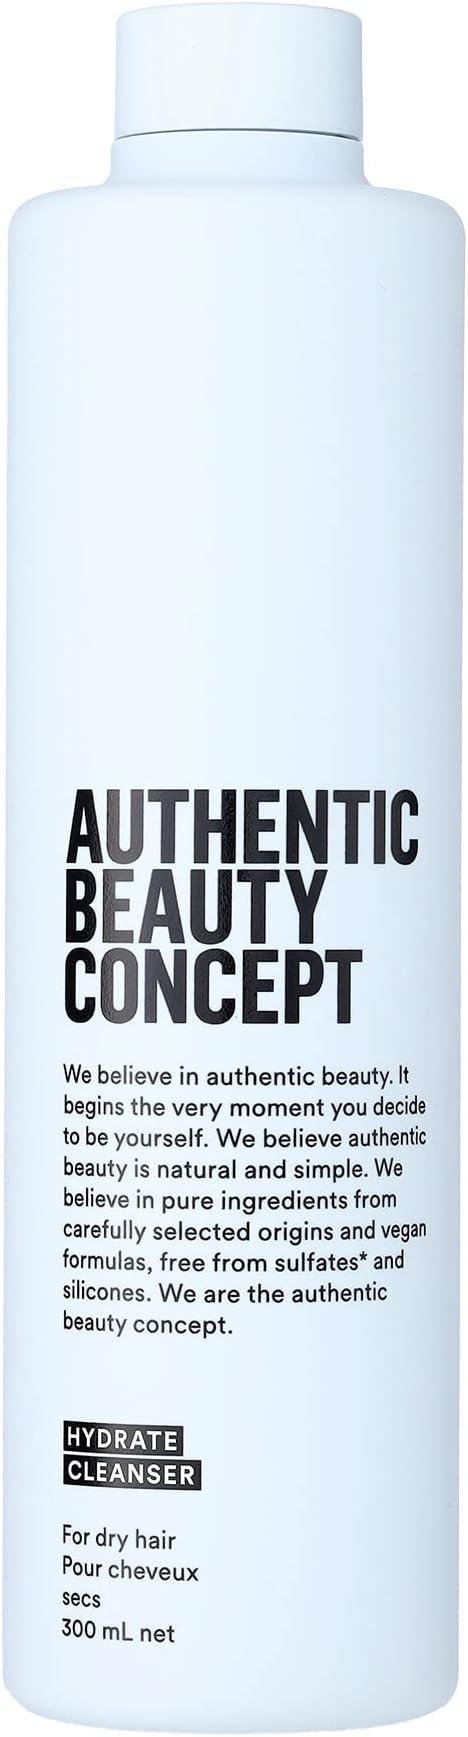 authentic beauty concept hydrate cleanser shampoo for hair types 300ml  authentic beauty concept ?b0bs9ylctq